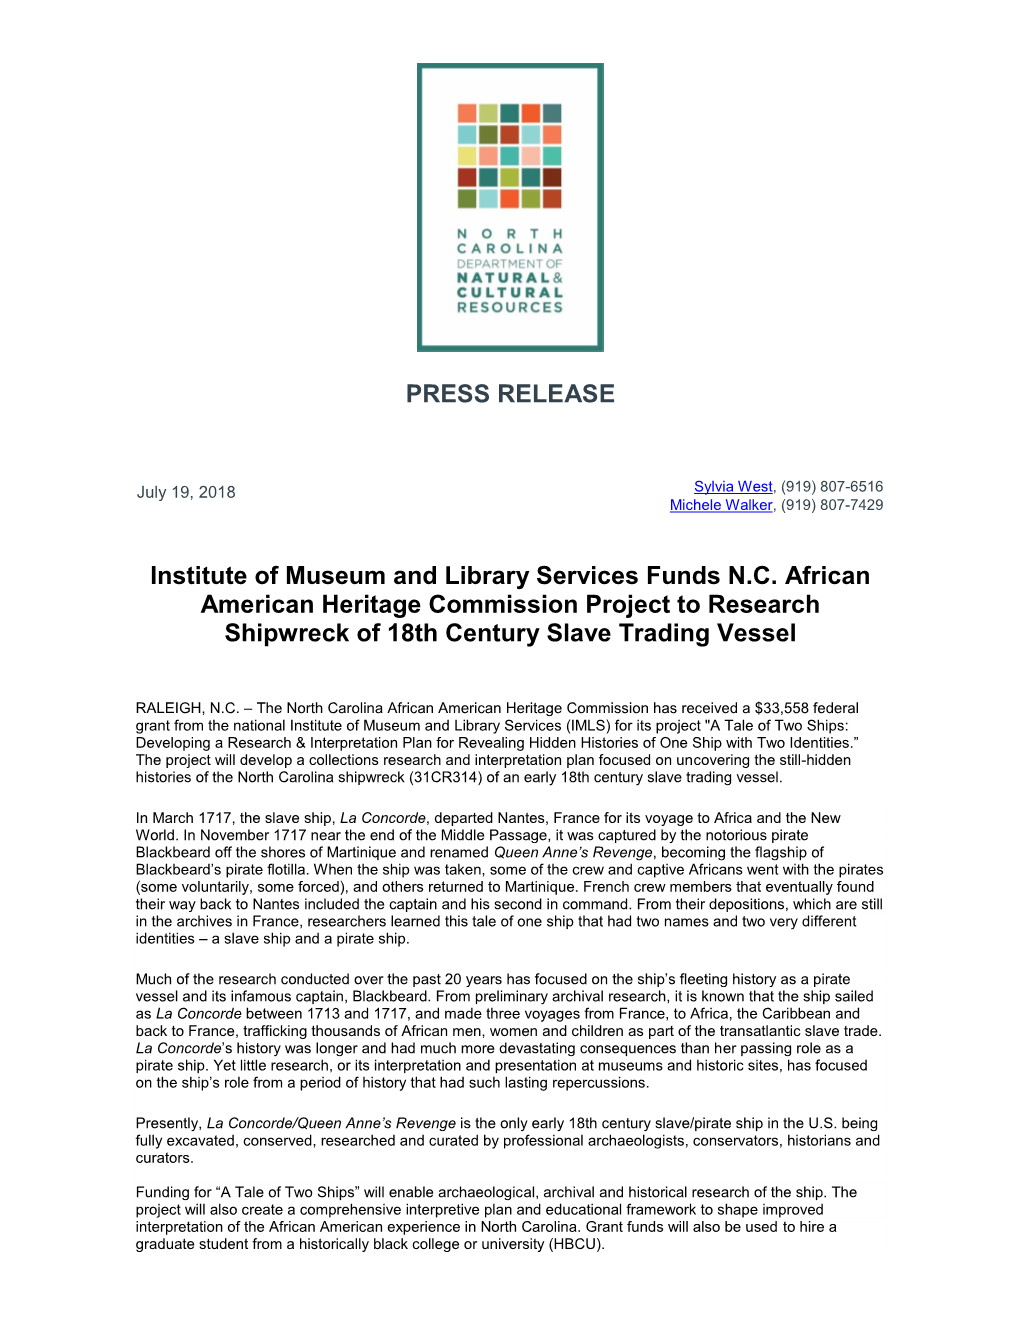 PRESS RELEASE Institute of Museum and Library Services Funds N.C